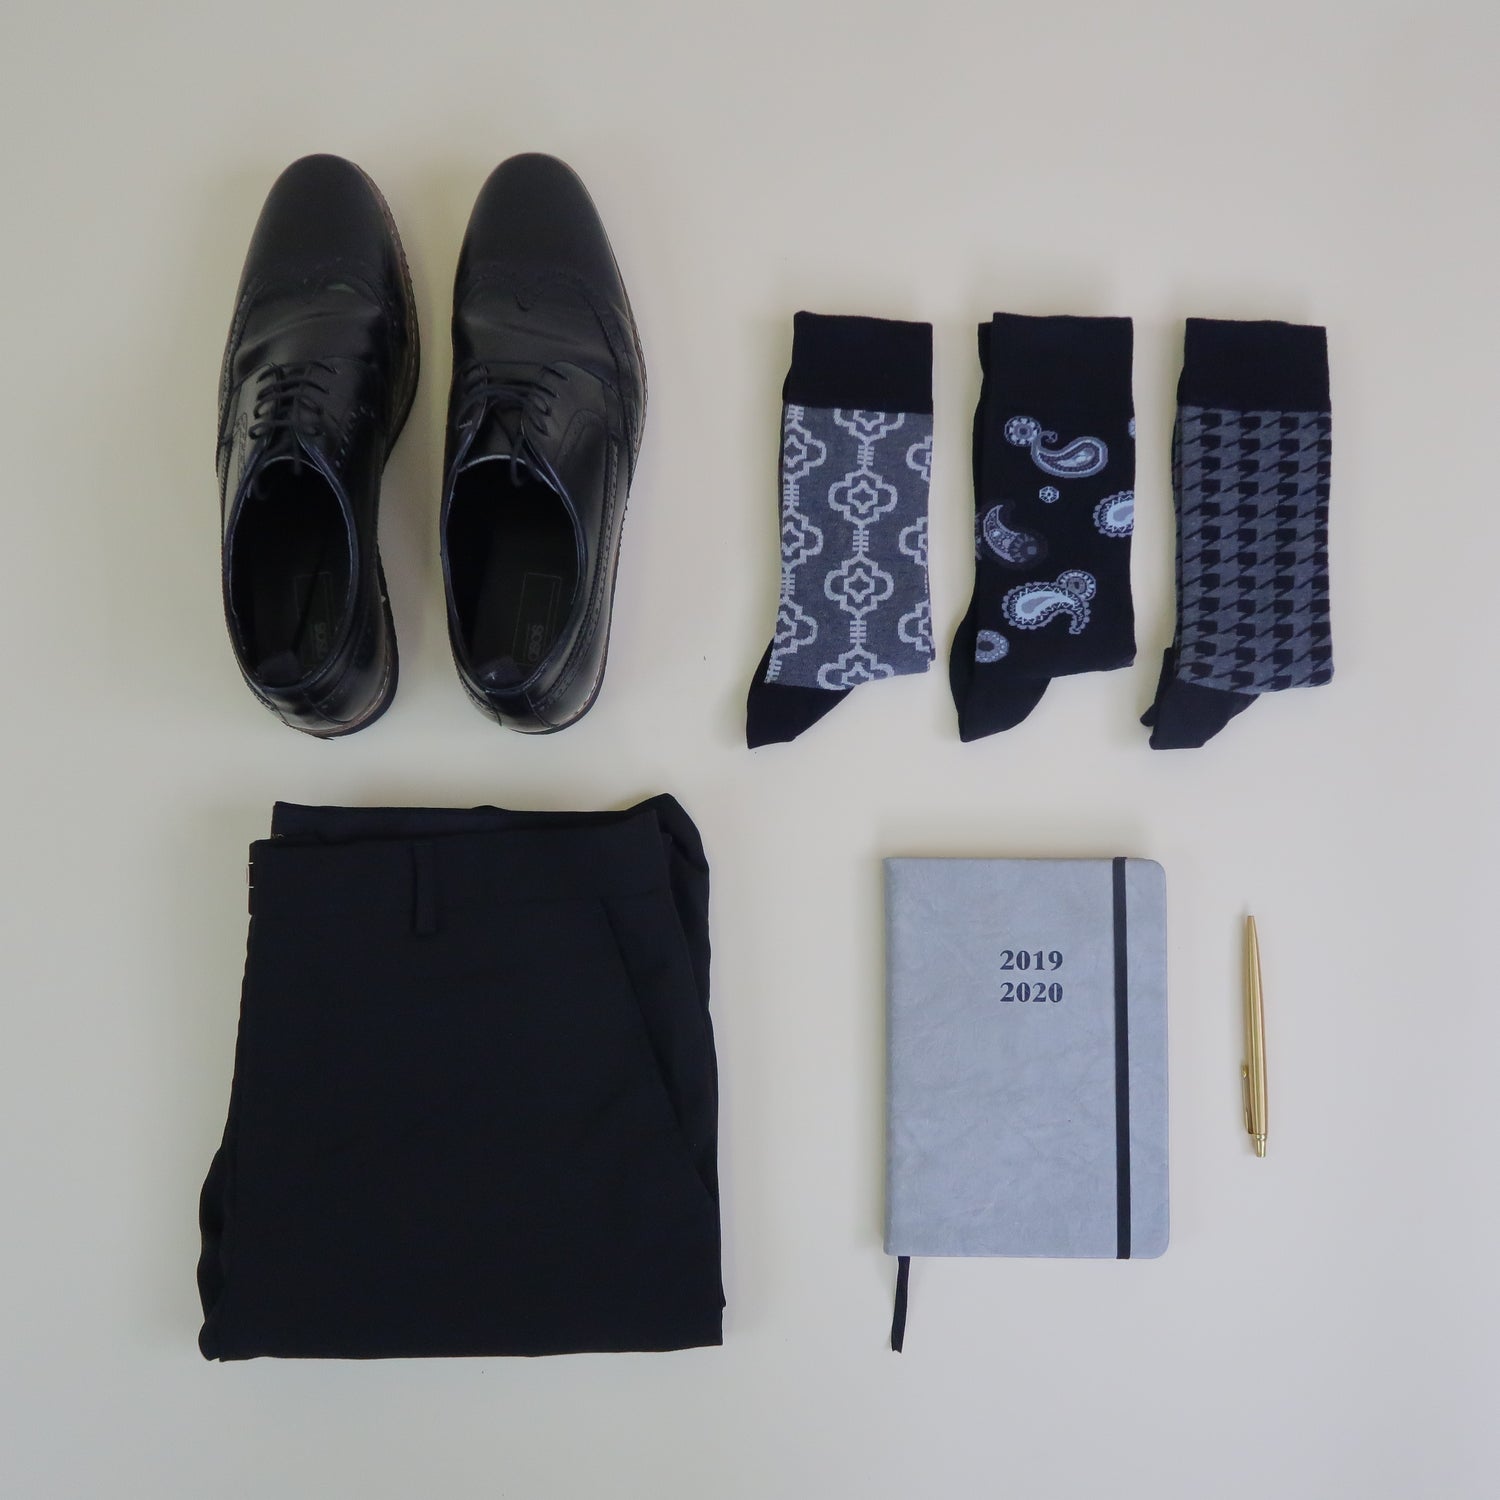 How To Style Your Socks - Cashmere Edition